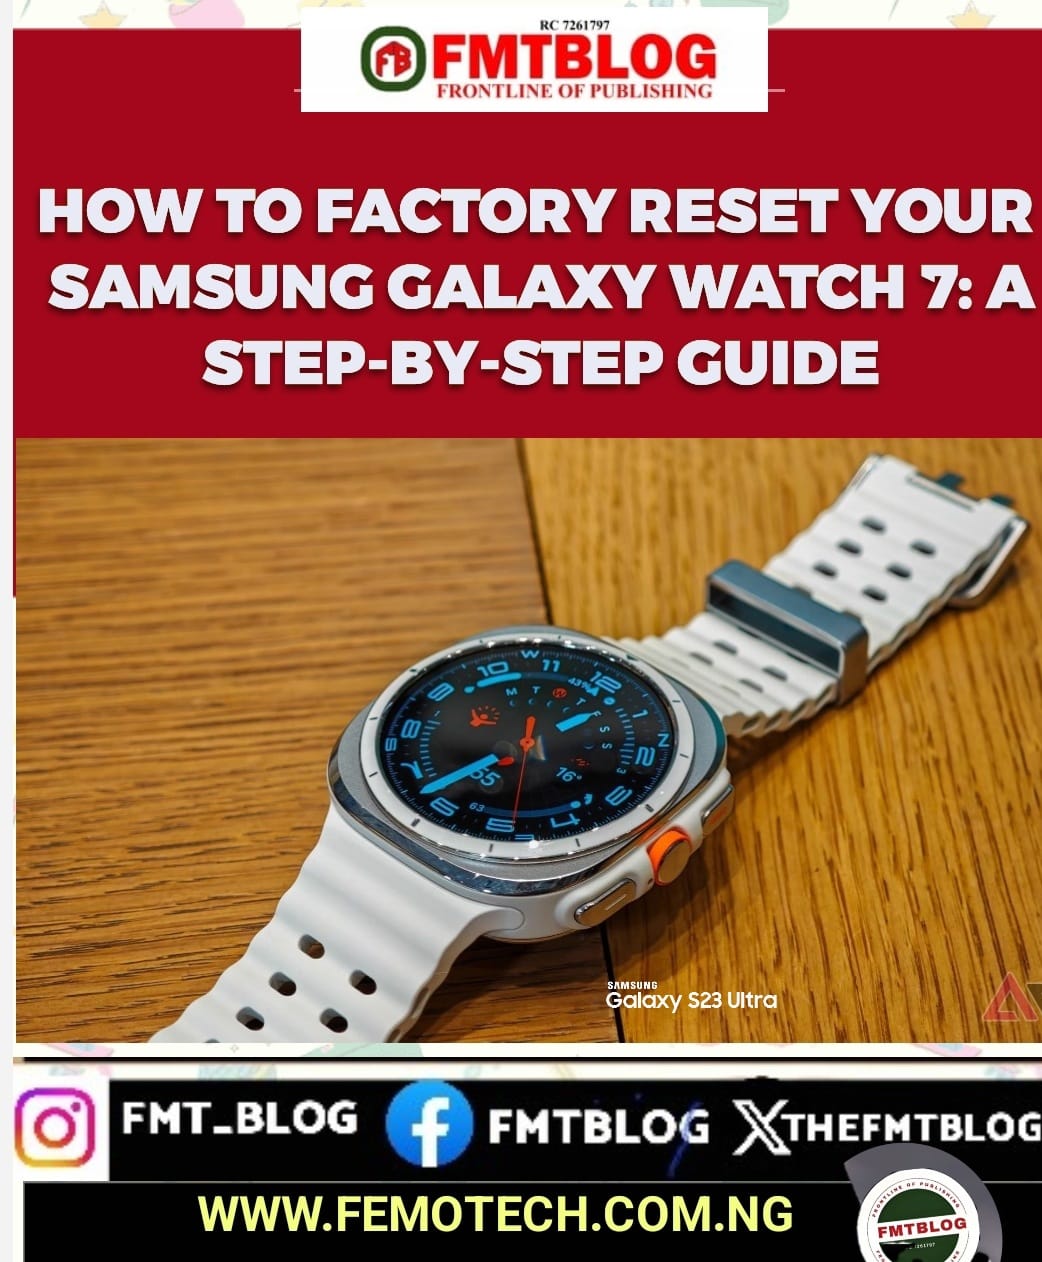 How to Factory Reset Your Samsung Galaxy Watch 7: A Step-by-Step Guide